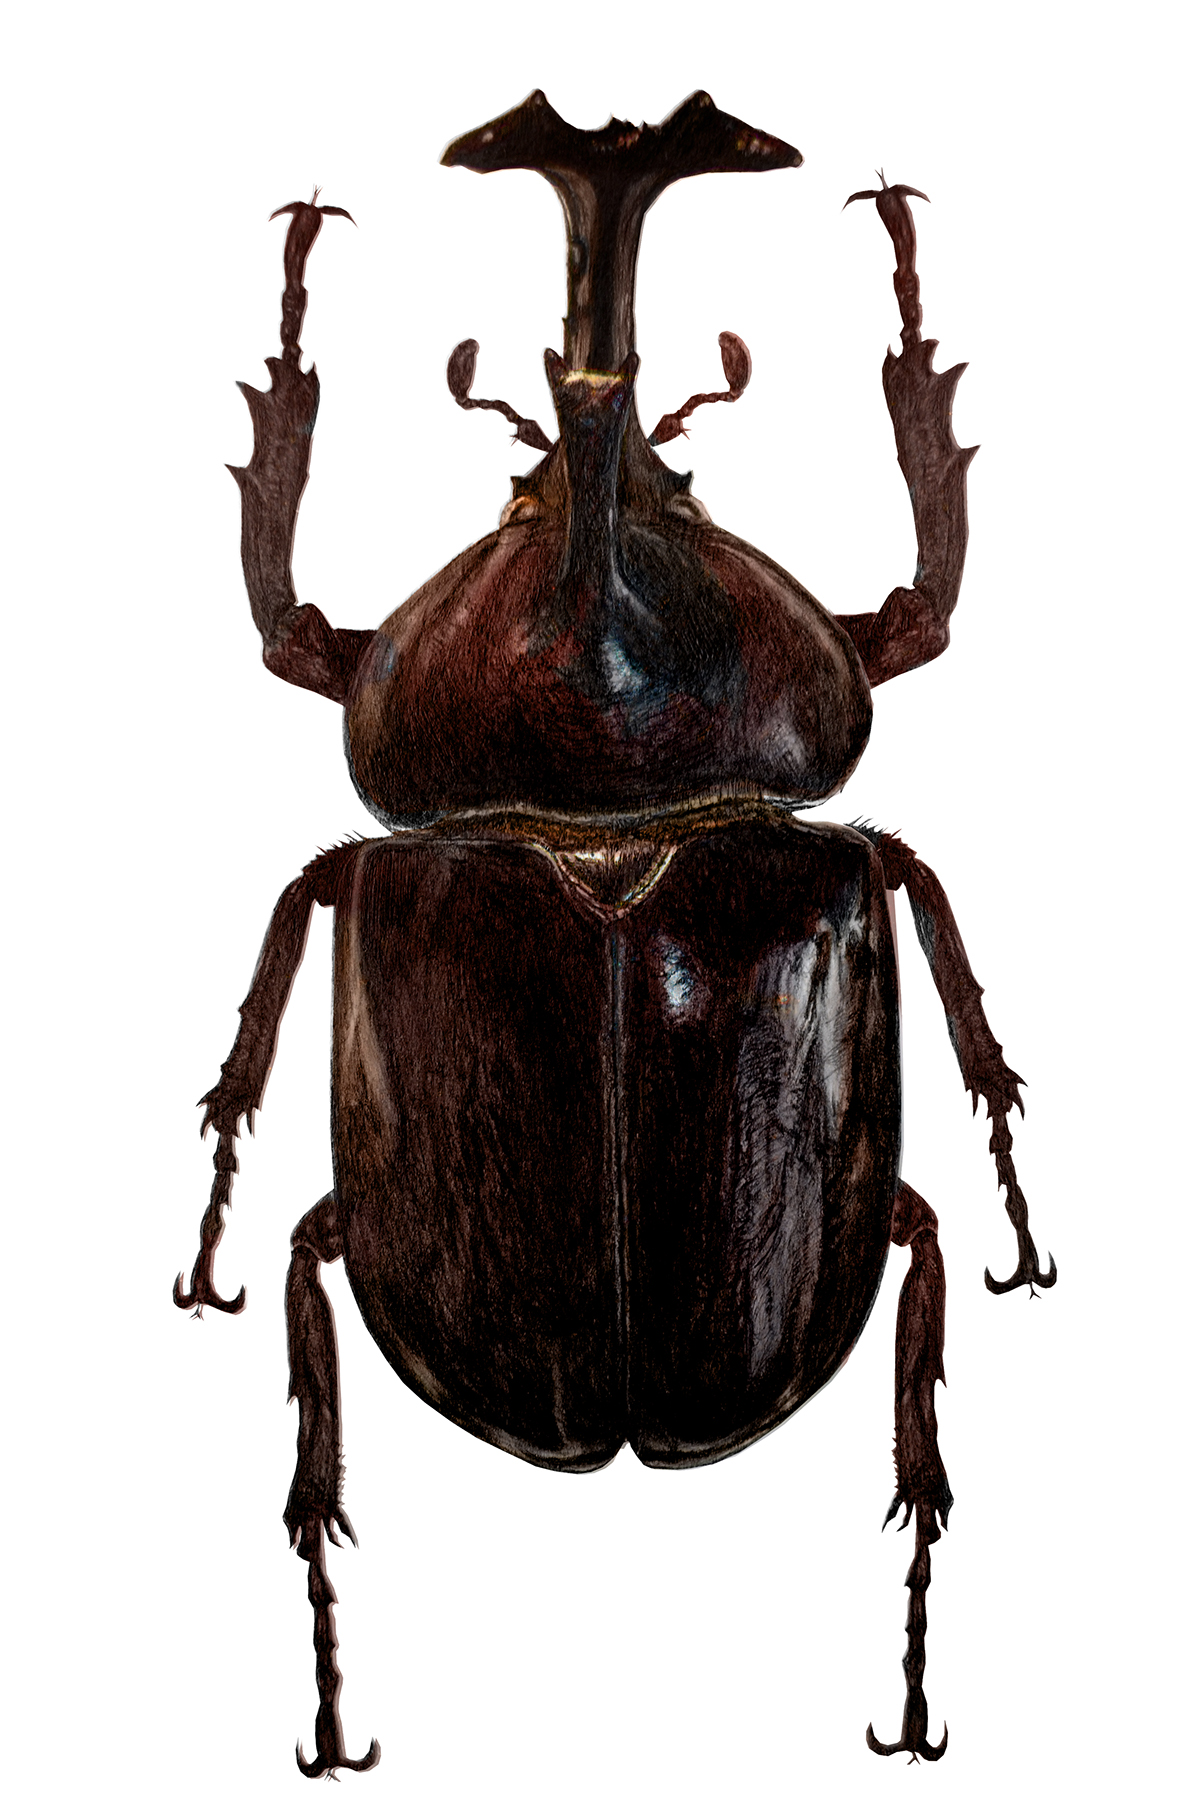  How To Draw A Rhinoceros Beetle in the world Learn more here 